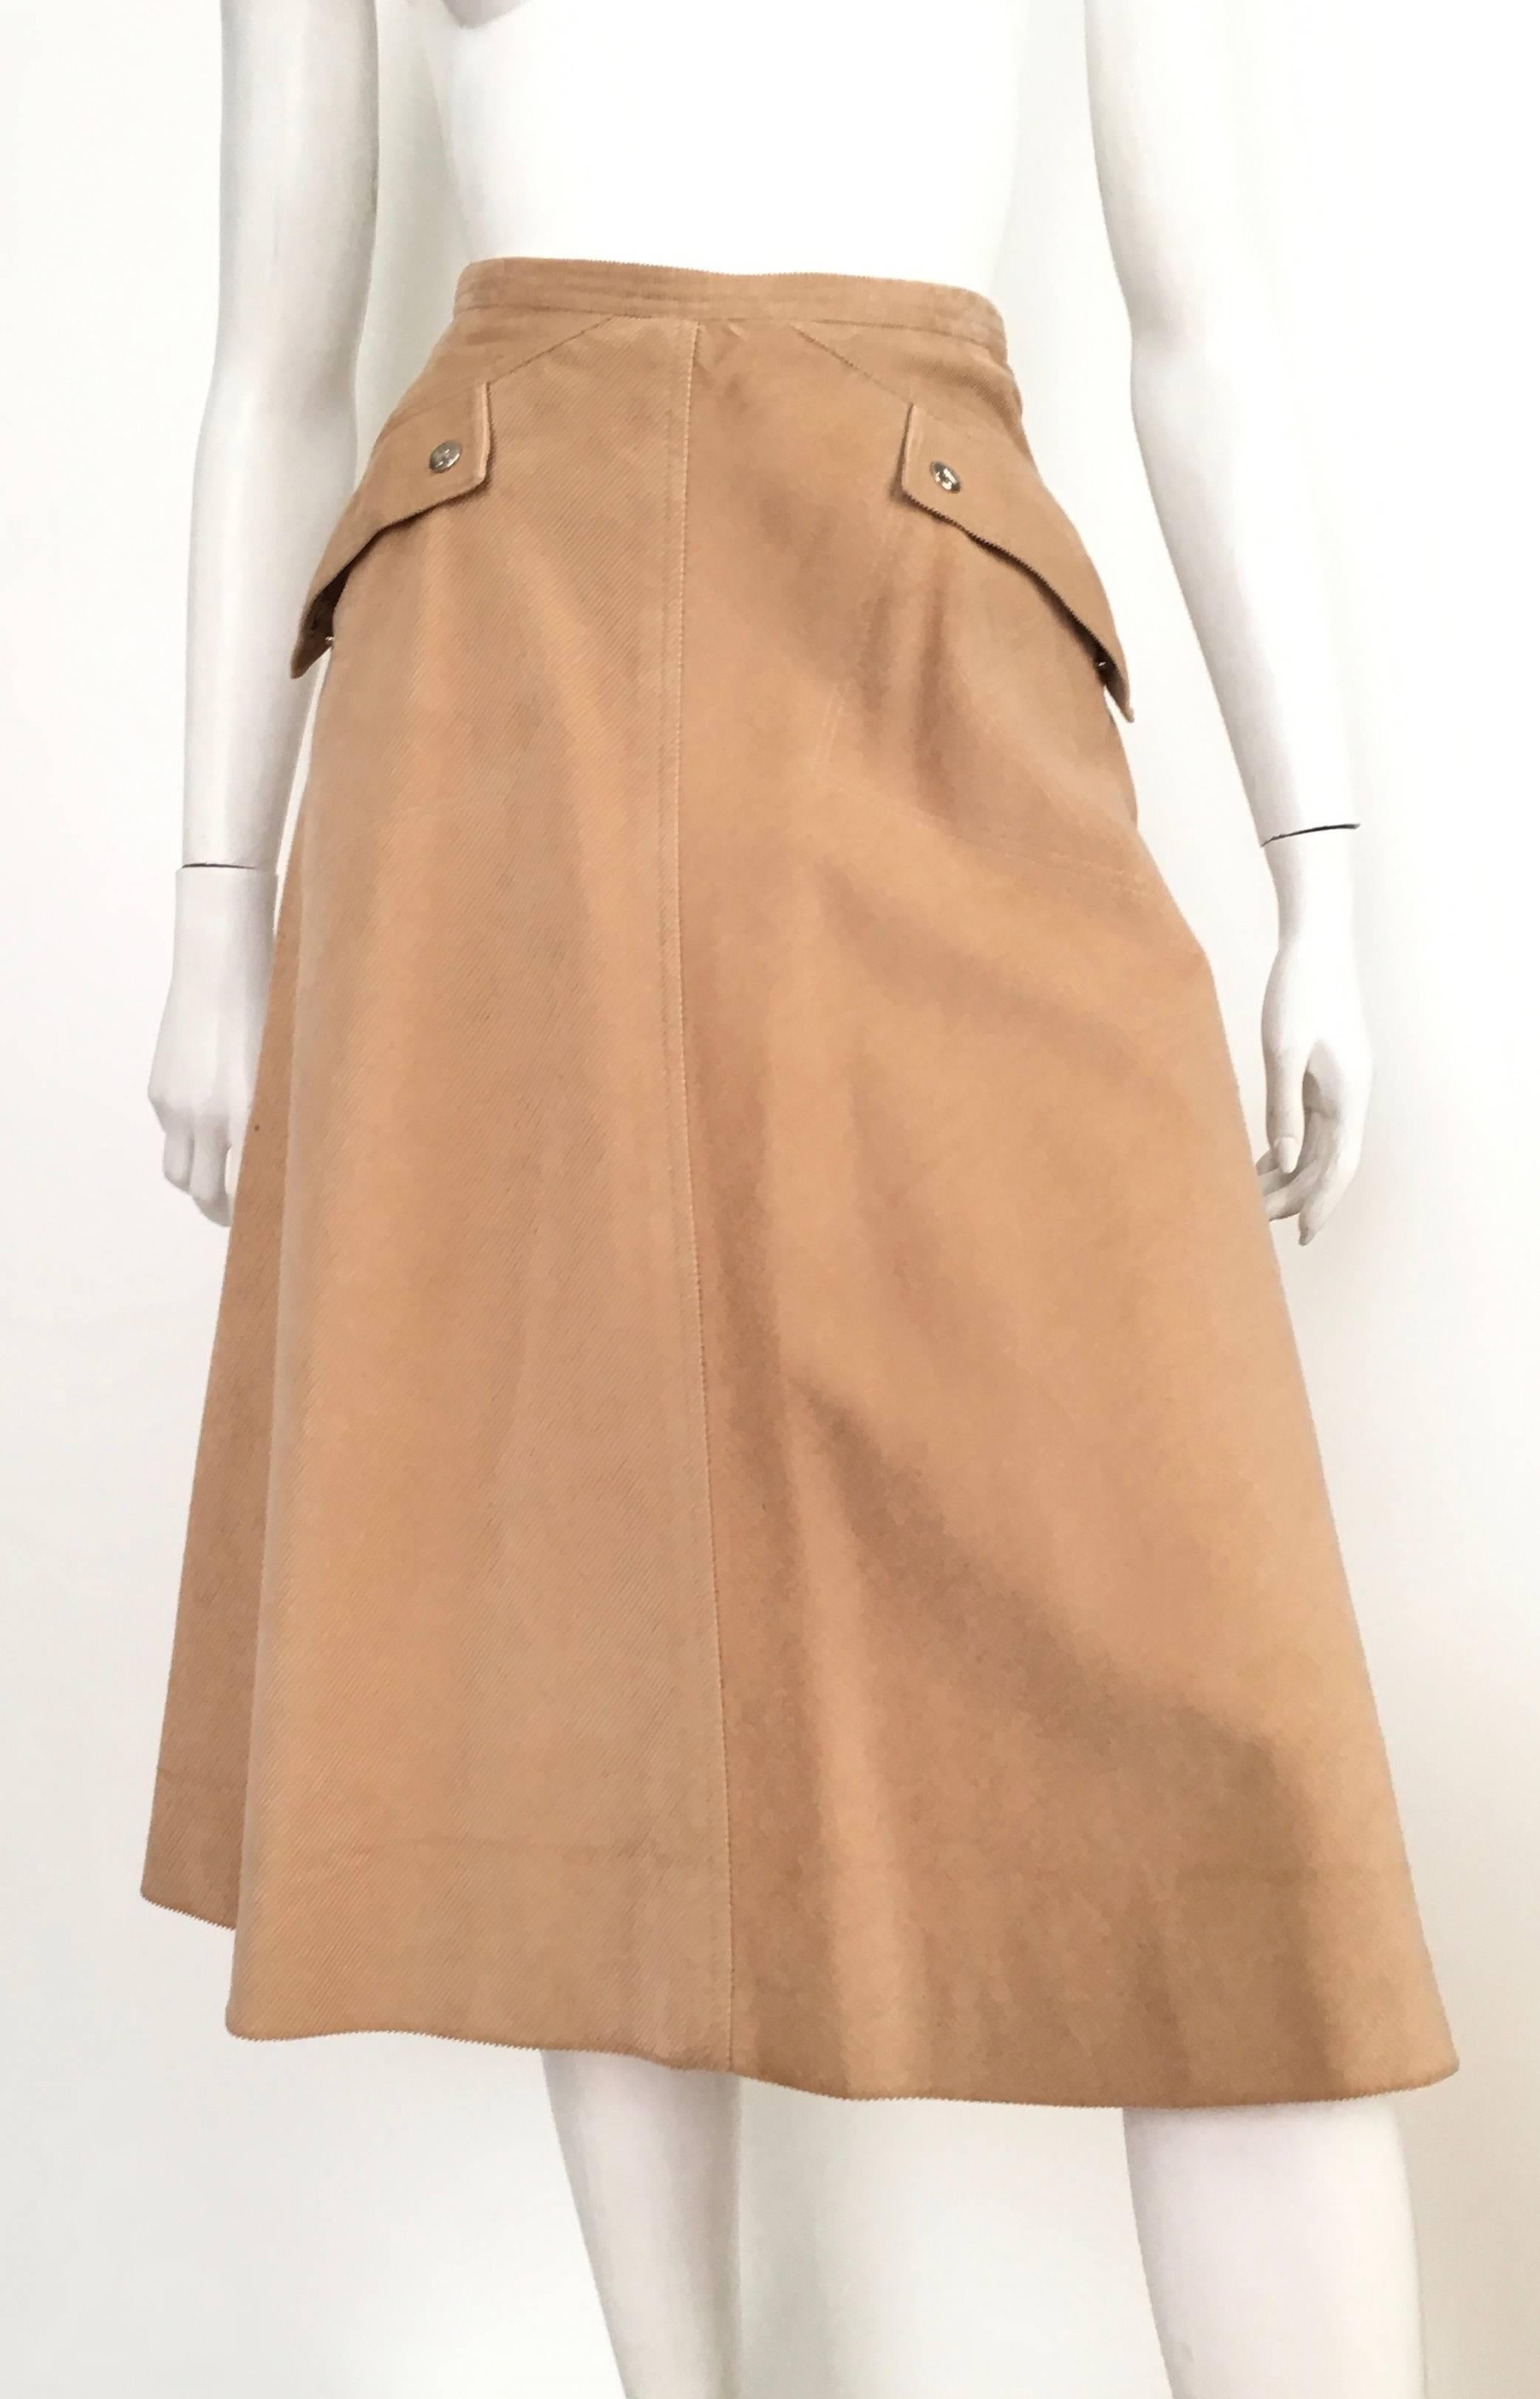 Courreges Paris khaki corduroy a-line two front pockets with logo snap buttons skirt is a size 4.  This fits Matilda the Mannequin perfectly and she is a true size 4, so if you and Matilda have the identical body then it's a green light.  Please use